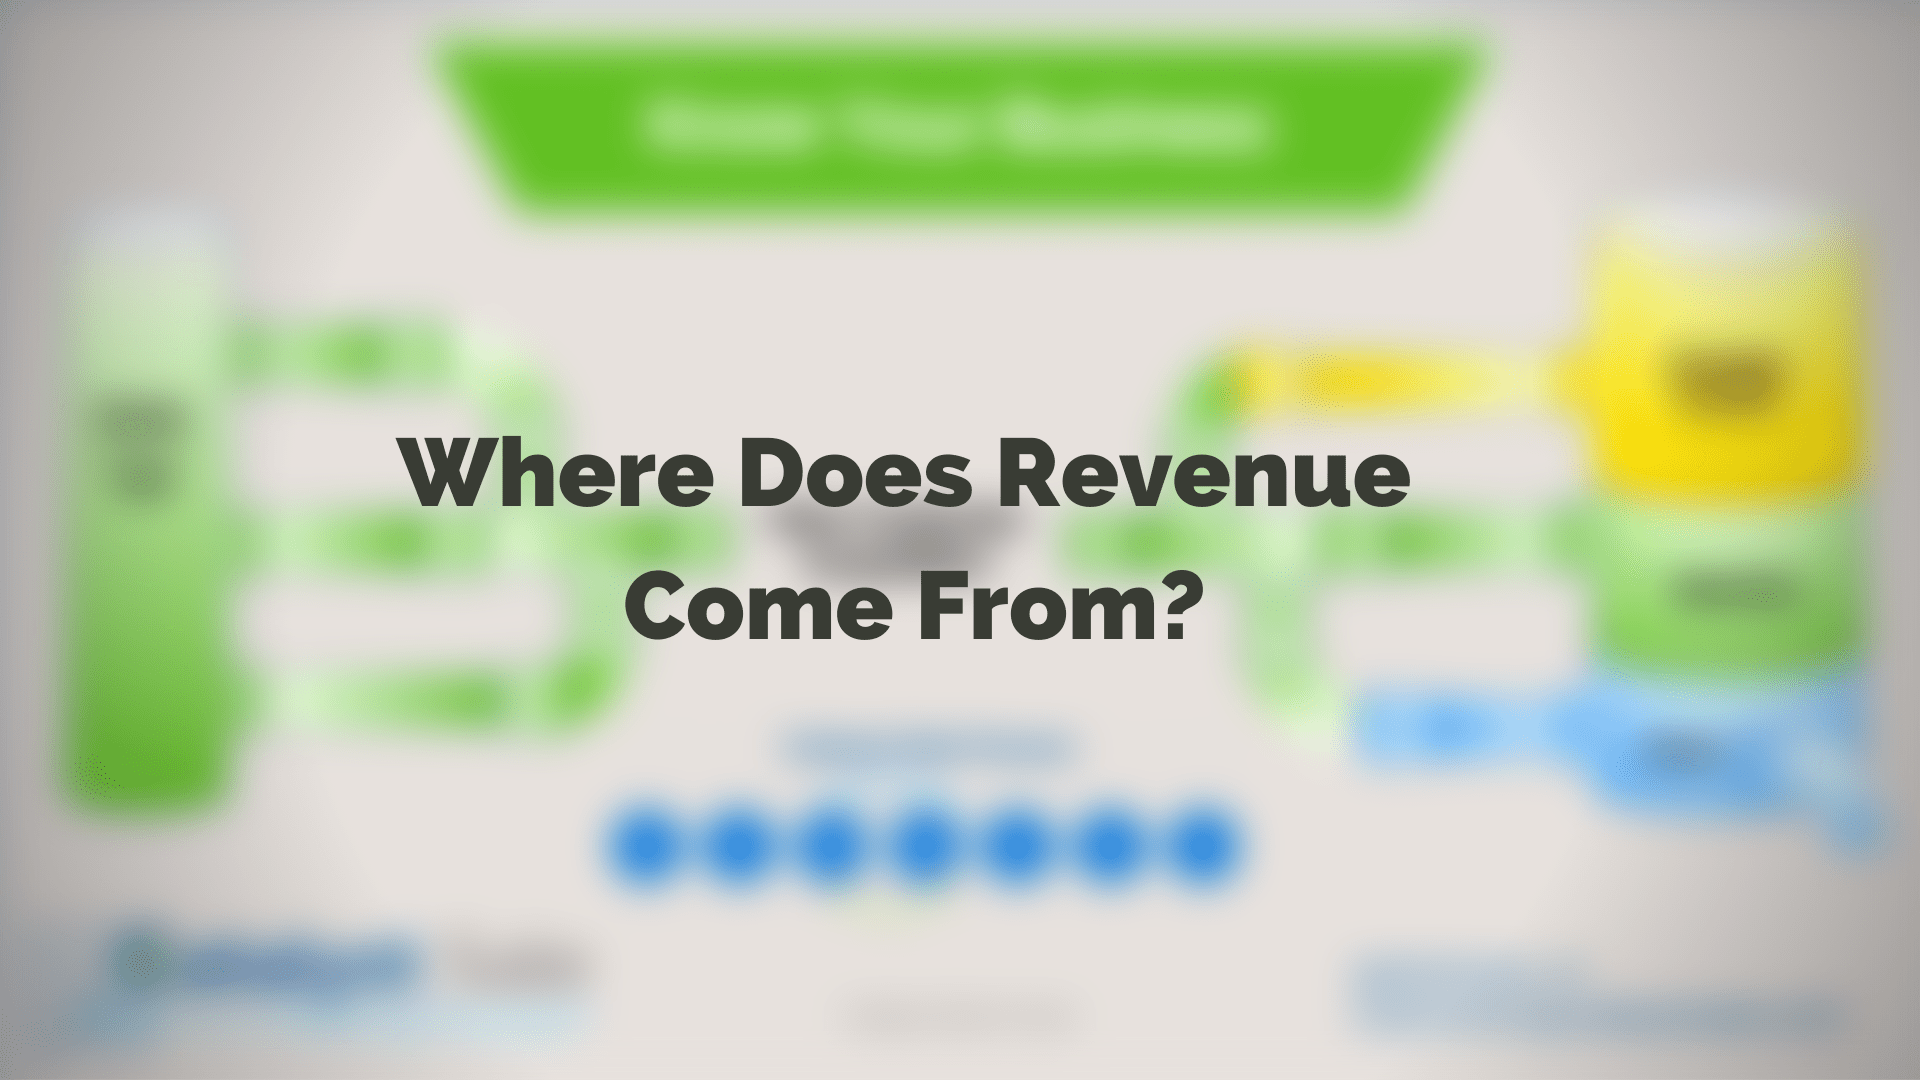 Where Does Revenue Come From?